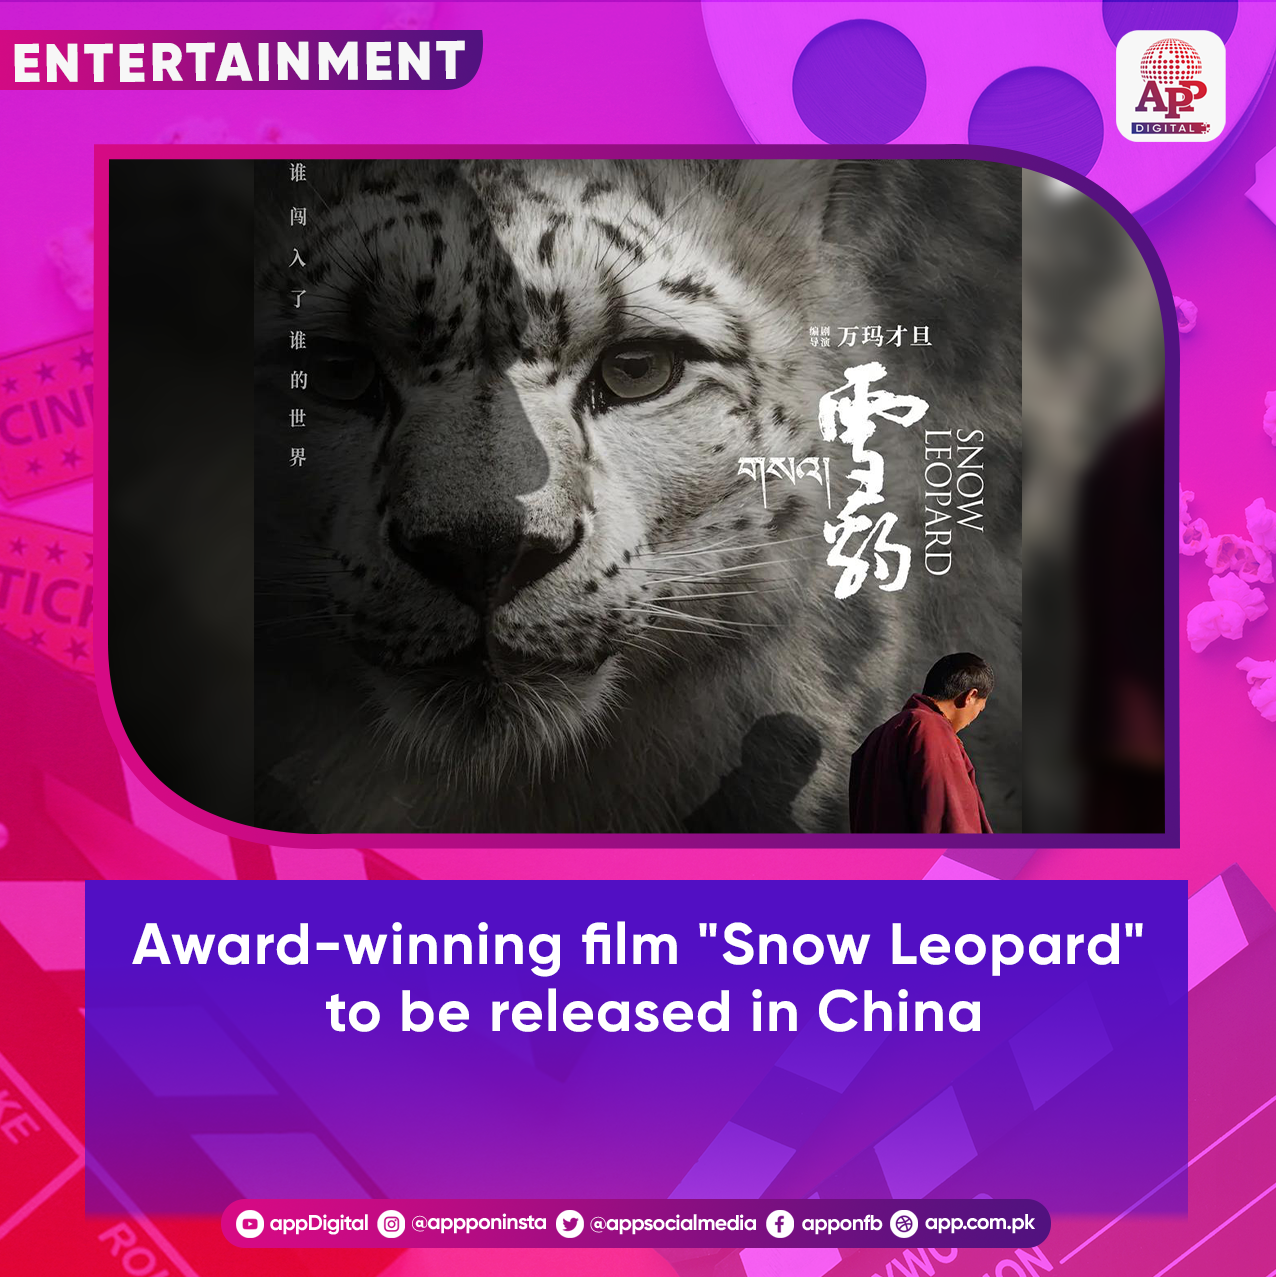 Award-winning film "Snow Leopard" to be released in China